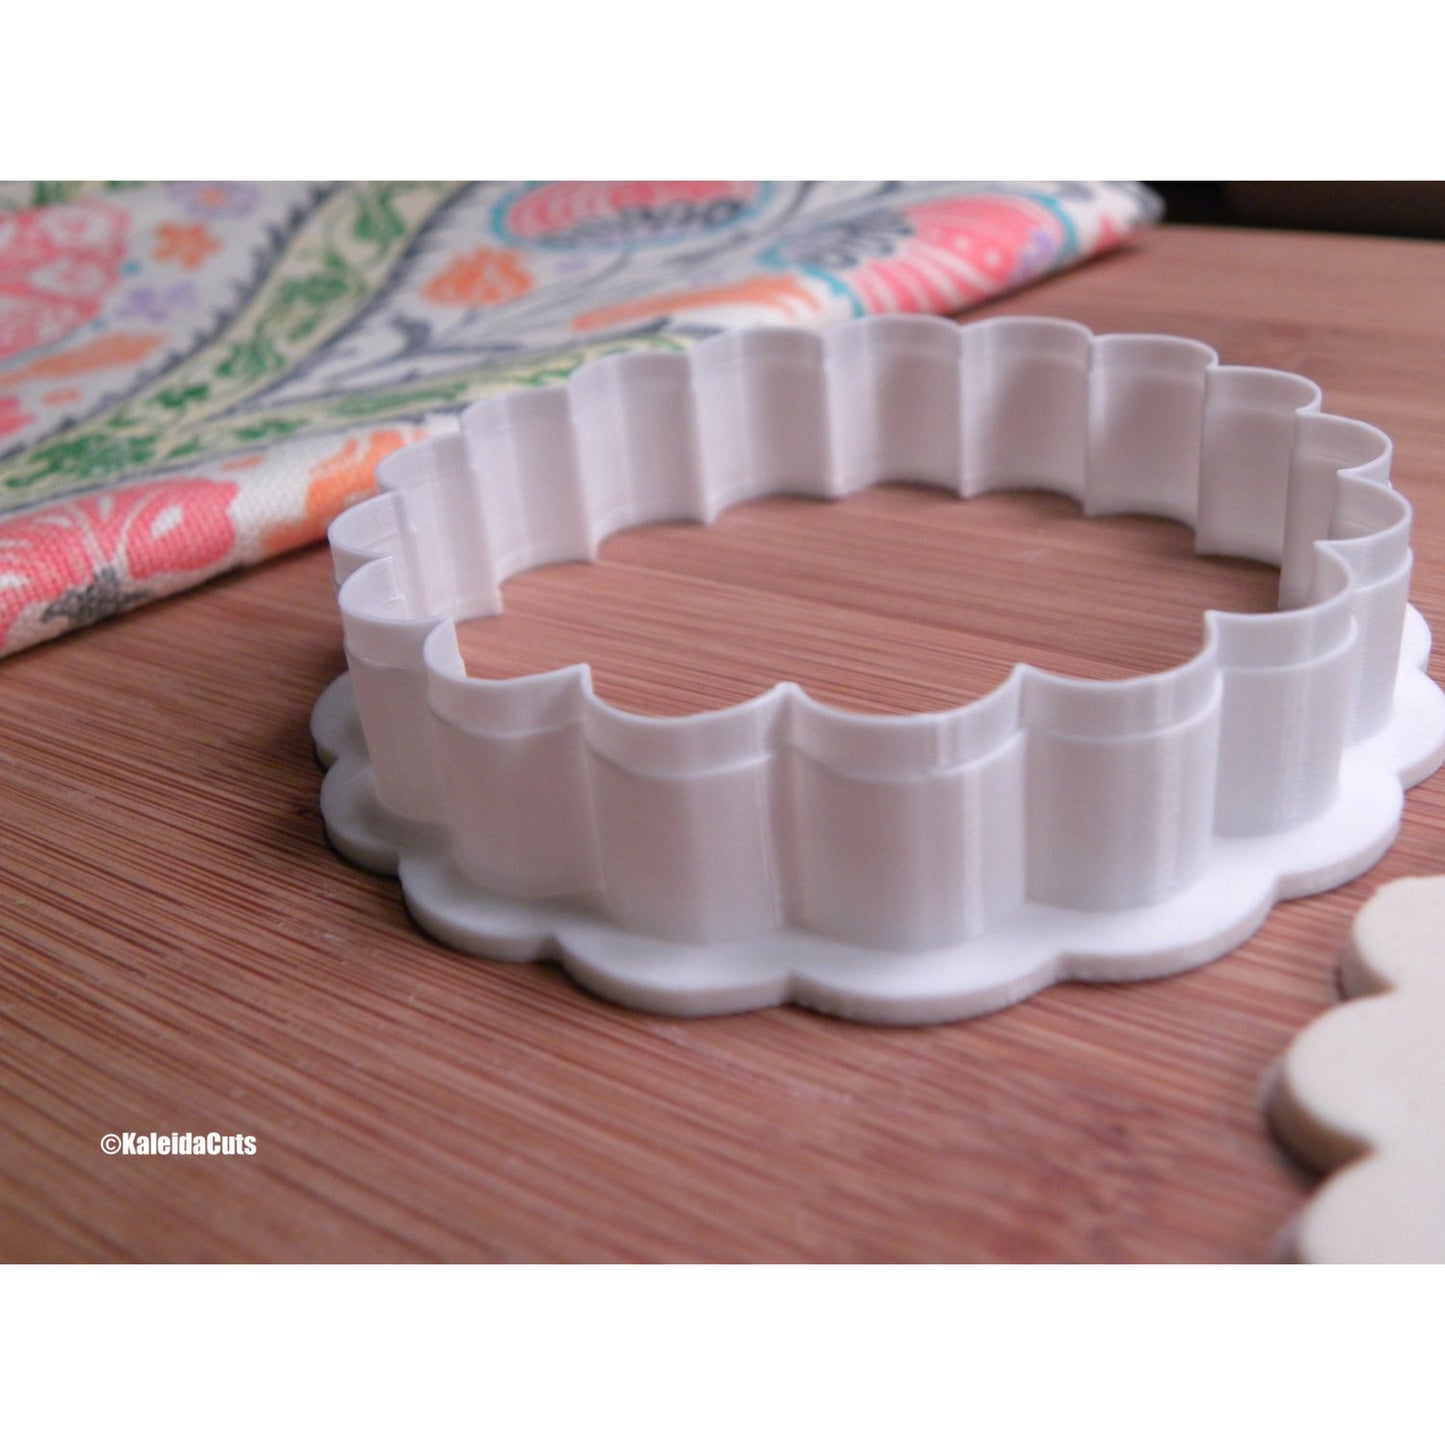 Scalloped Circle Cookie Cutter